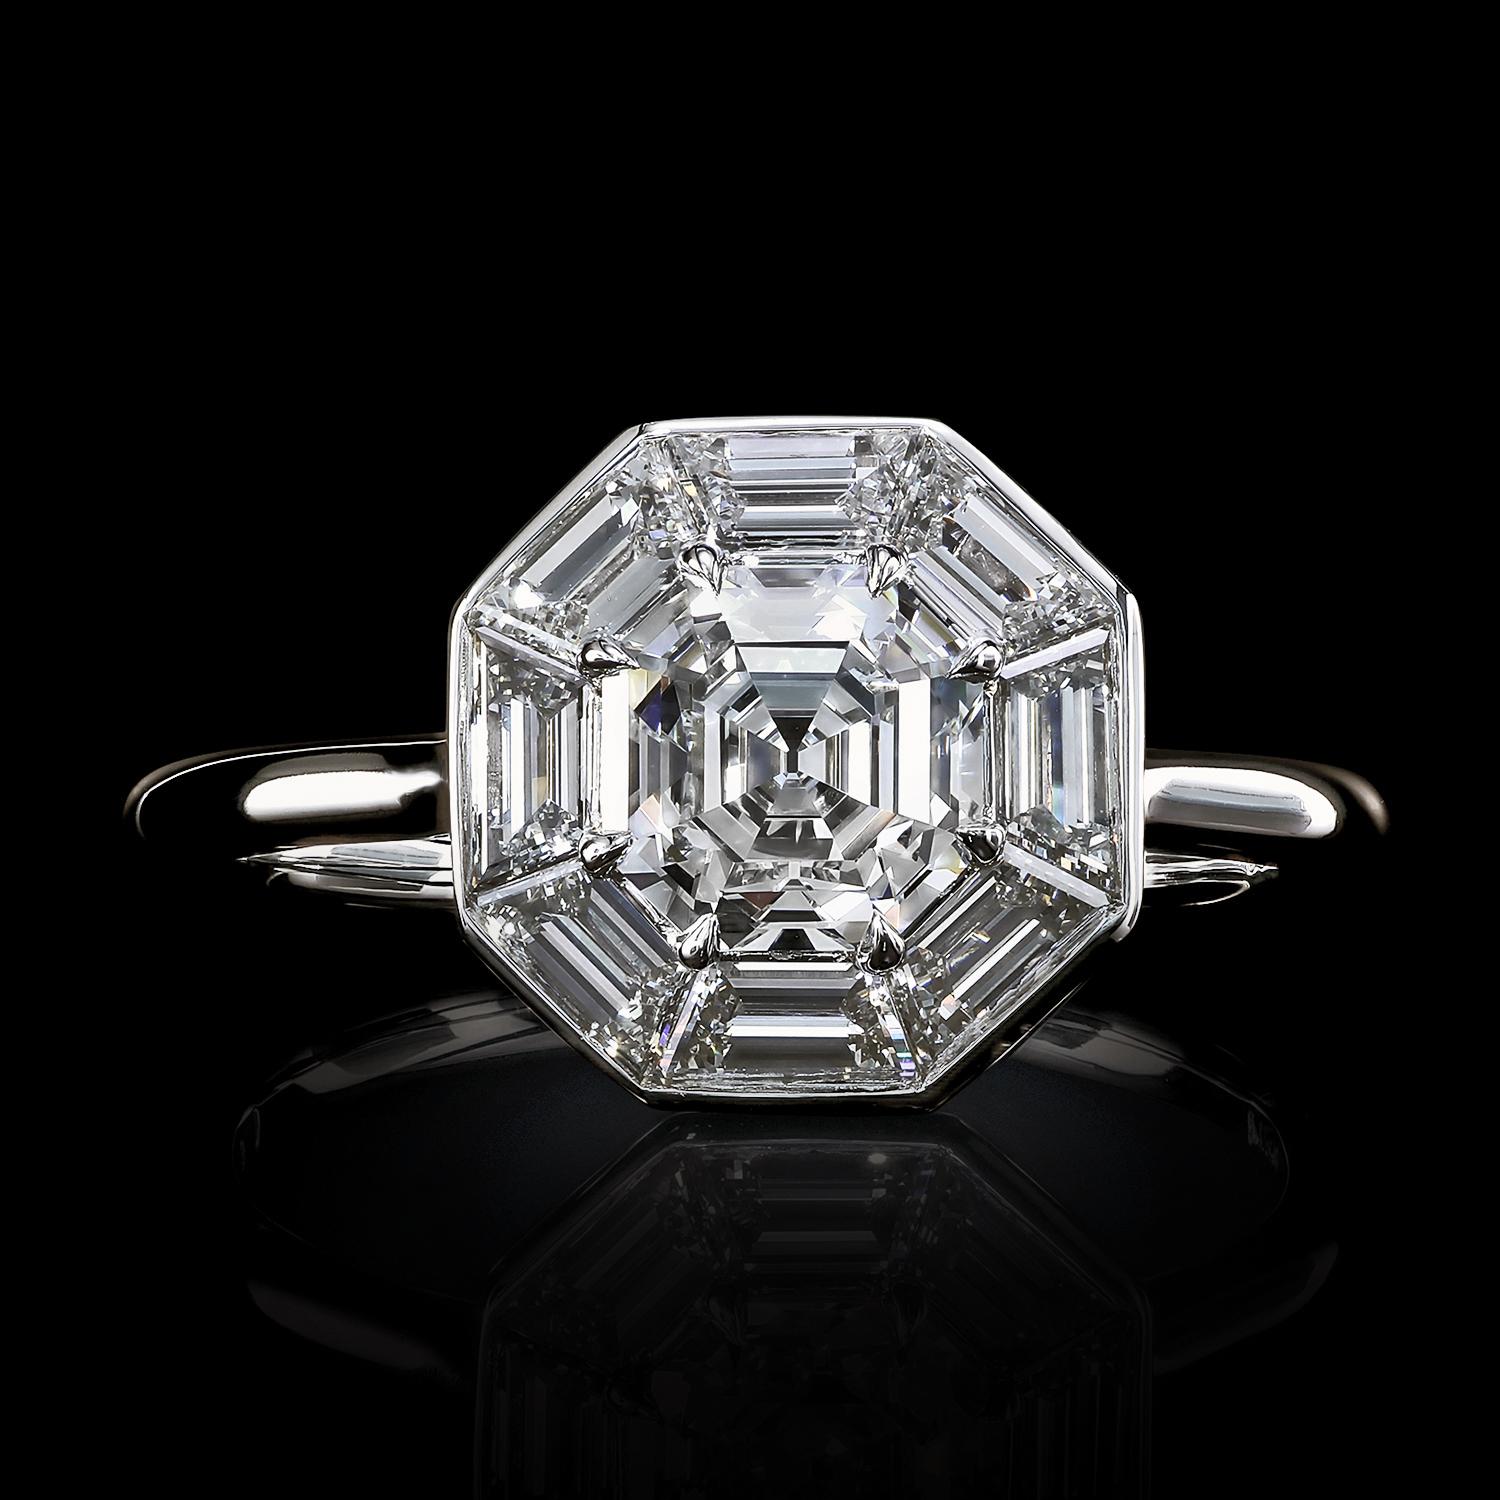 Brilliance is captured and serves a light sentence inside the stunning Asscher, extended with step-cut trapezoids on all sides. The ring's head is sealed in a skinny octagonal bezel on the slim arms of the elegant and very thin band.

Stunning True